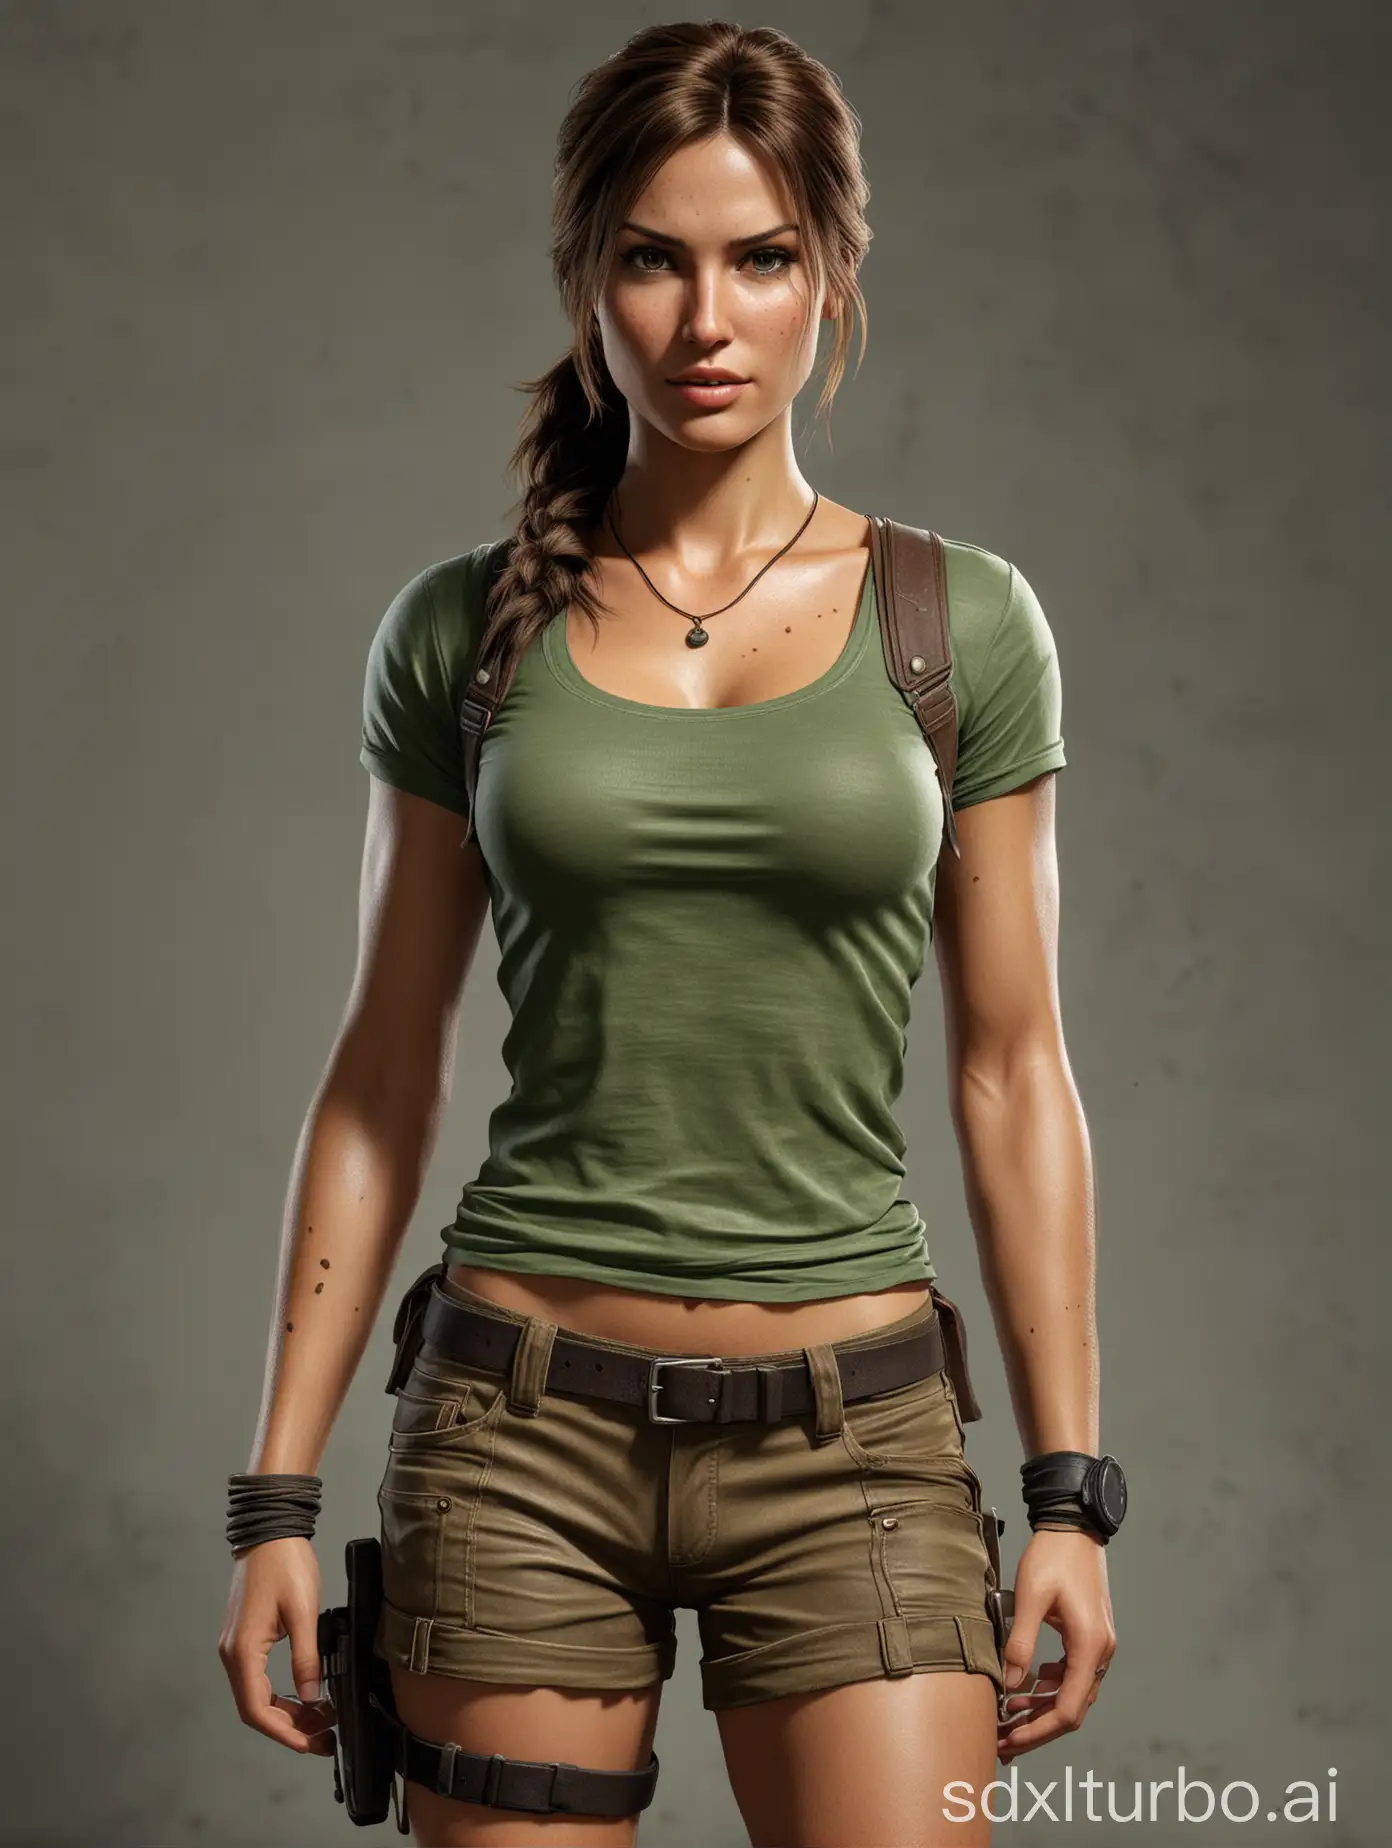 Tomb-Raider-Character-in-Green-Top-and-Brown-Shorts